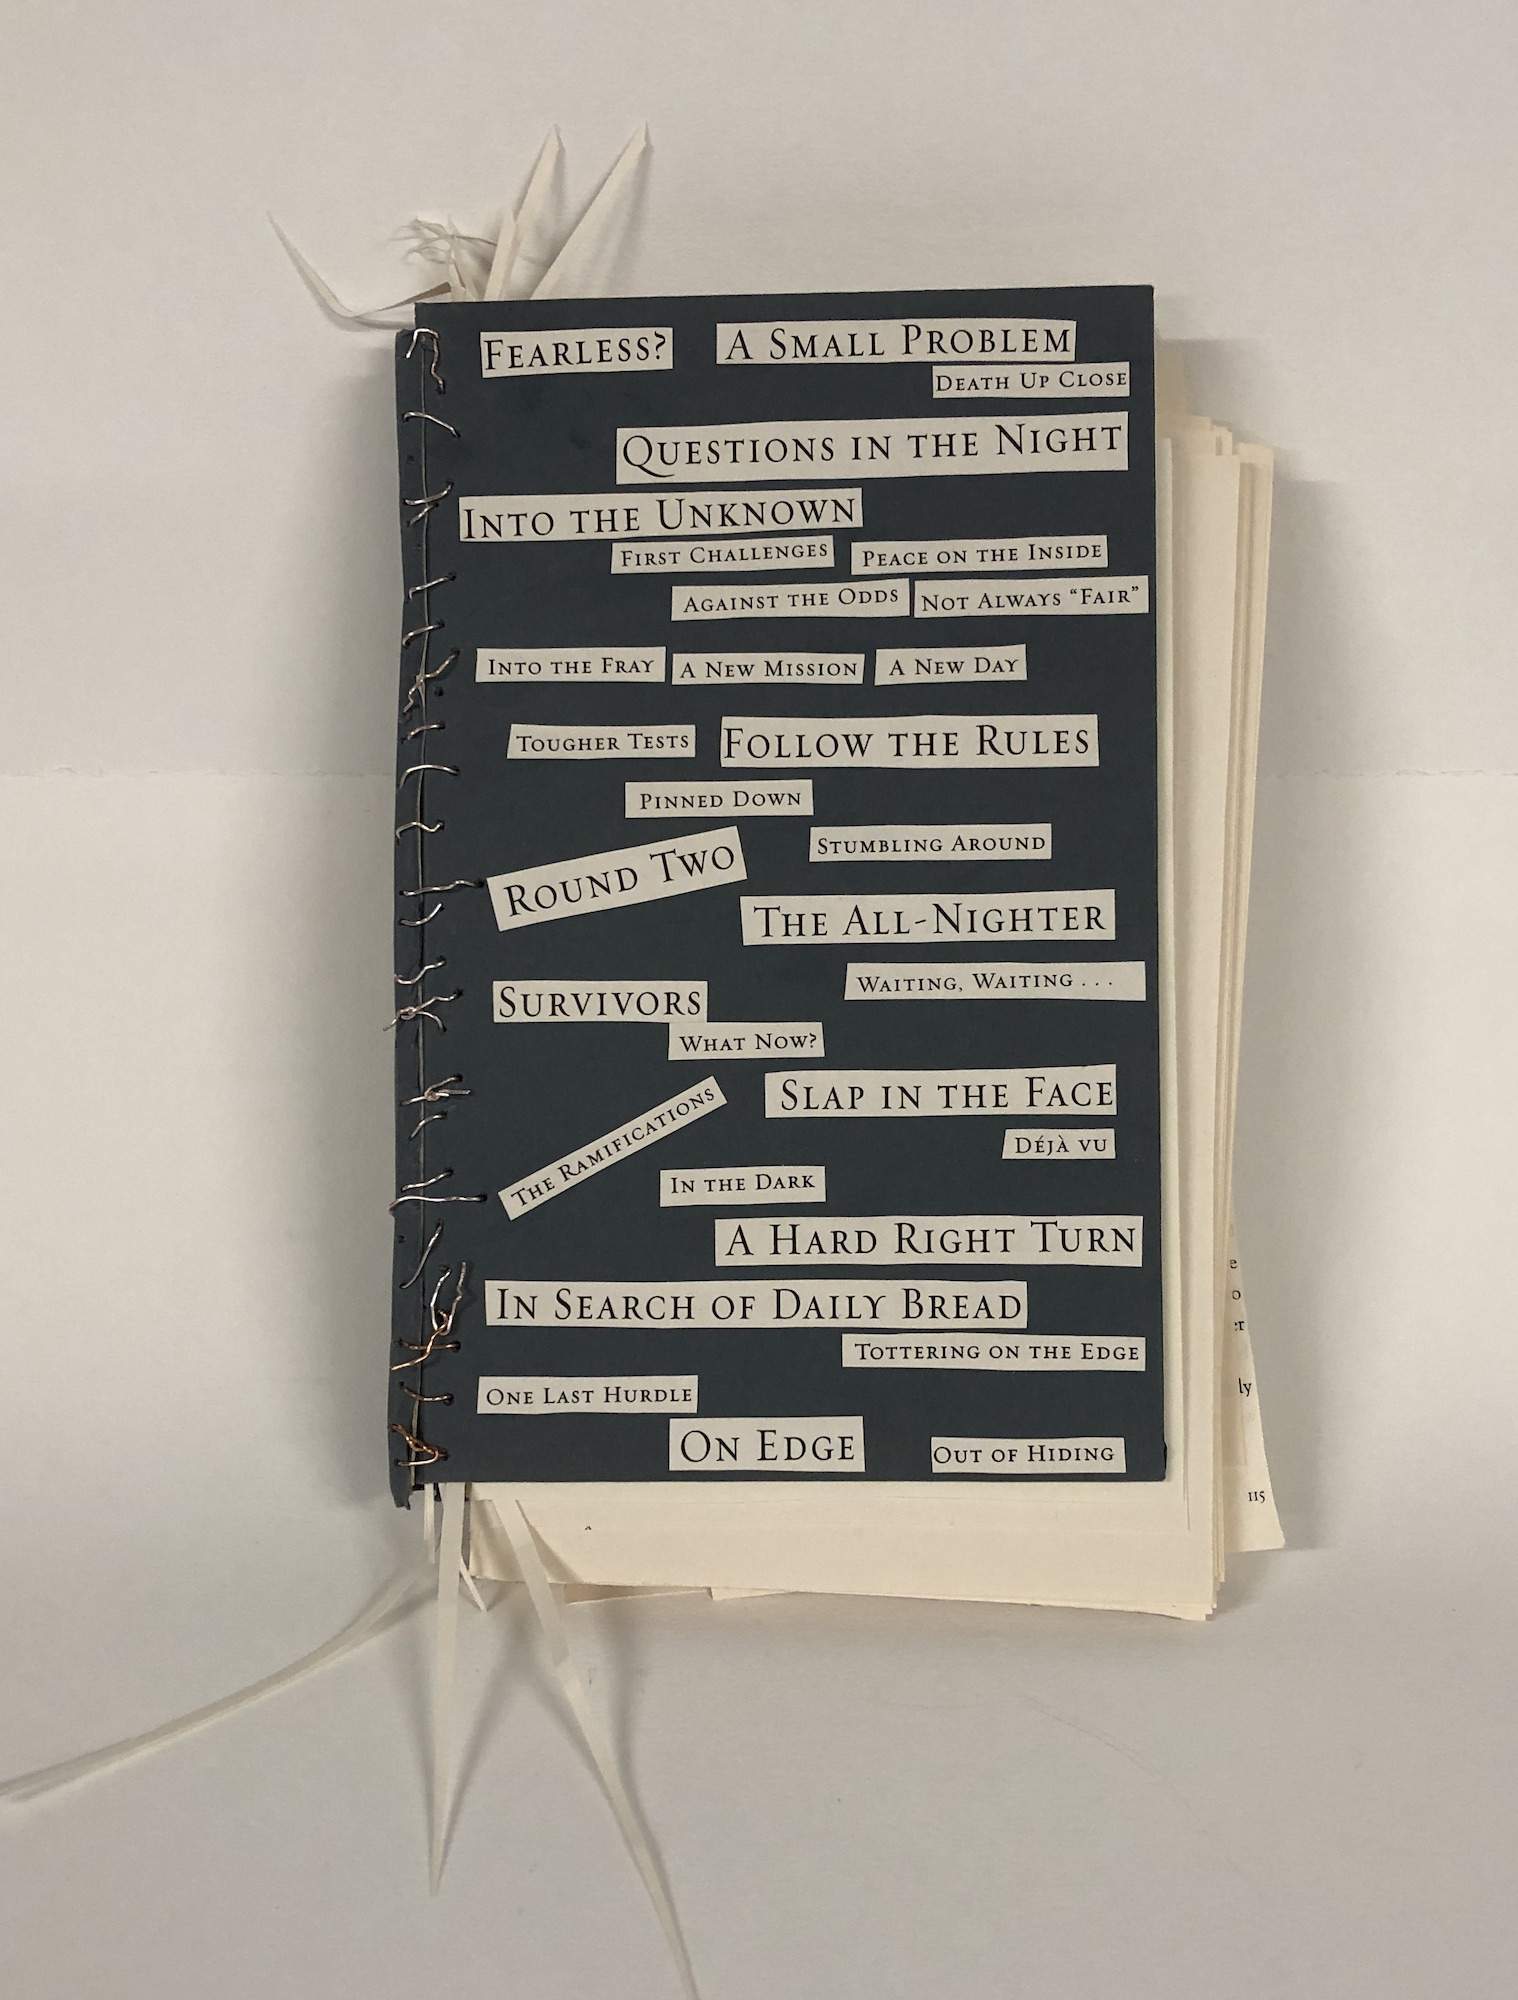 Artwork by Maggie Kerrigan, a book that has been deconstructed and then reconstructed